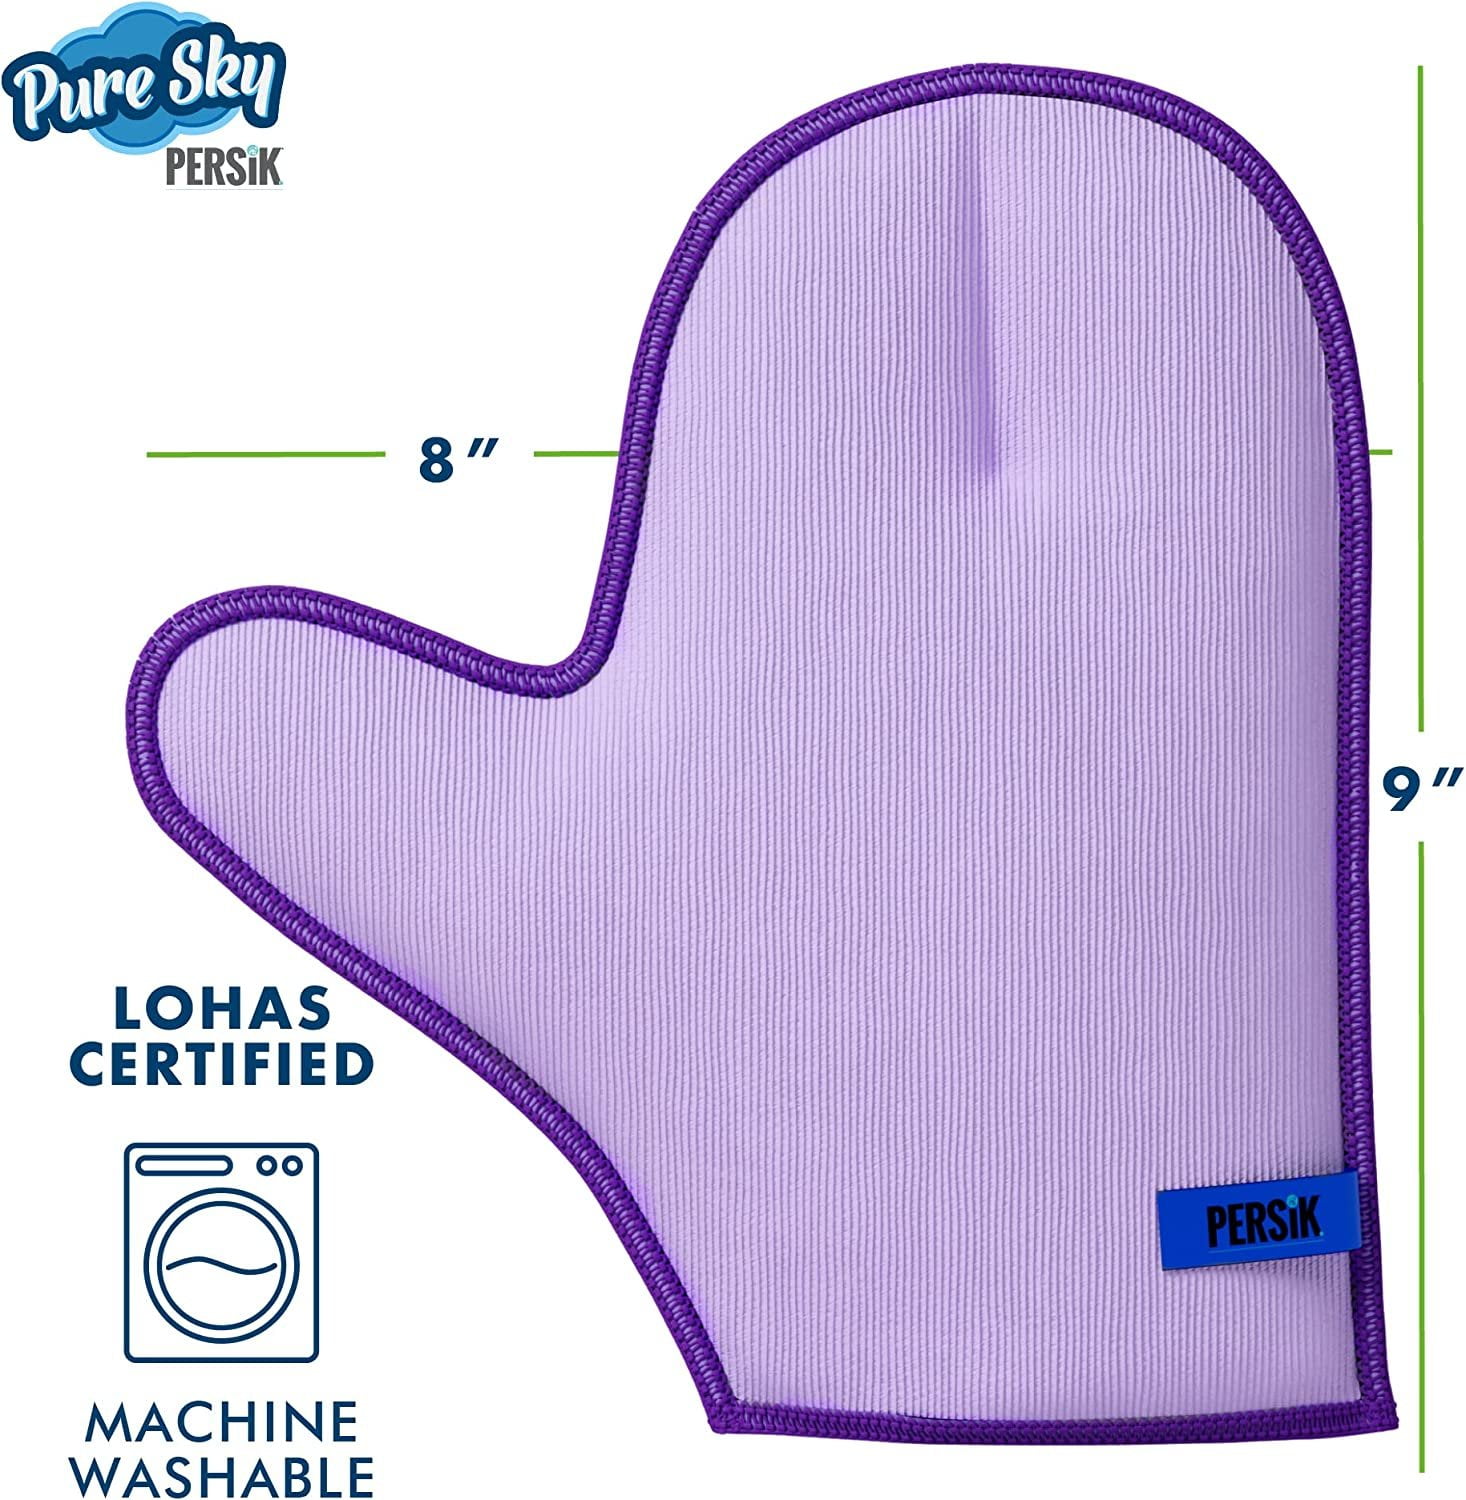 Cloth and Towel Free Water + JUST Detergents Glass Pure-Sky Streak No + ADD Includes Cleaning - Glove/MITT Cleaning Needed Ultra-Microfiber Window Dusting and Cleaning - Kitchen Sponge Cleaning